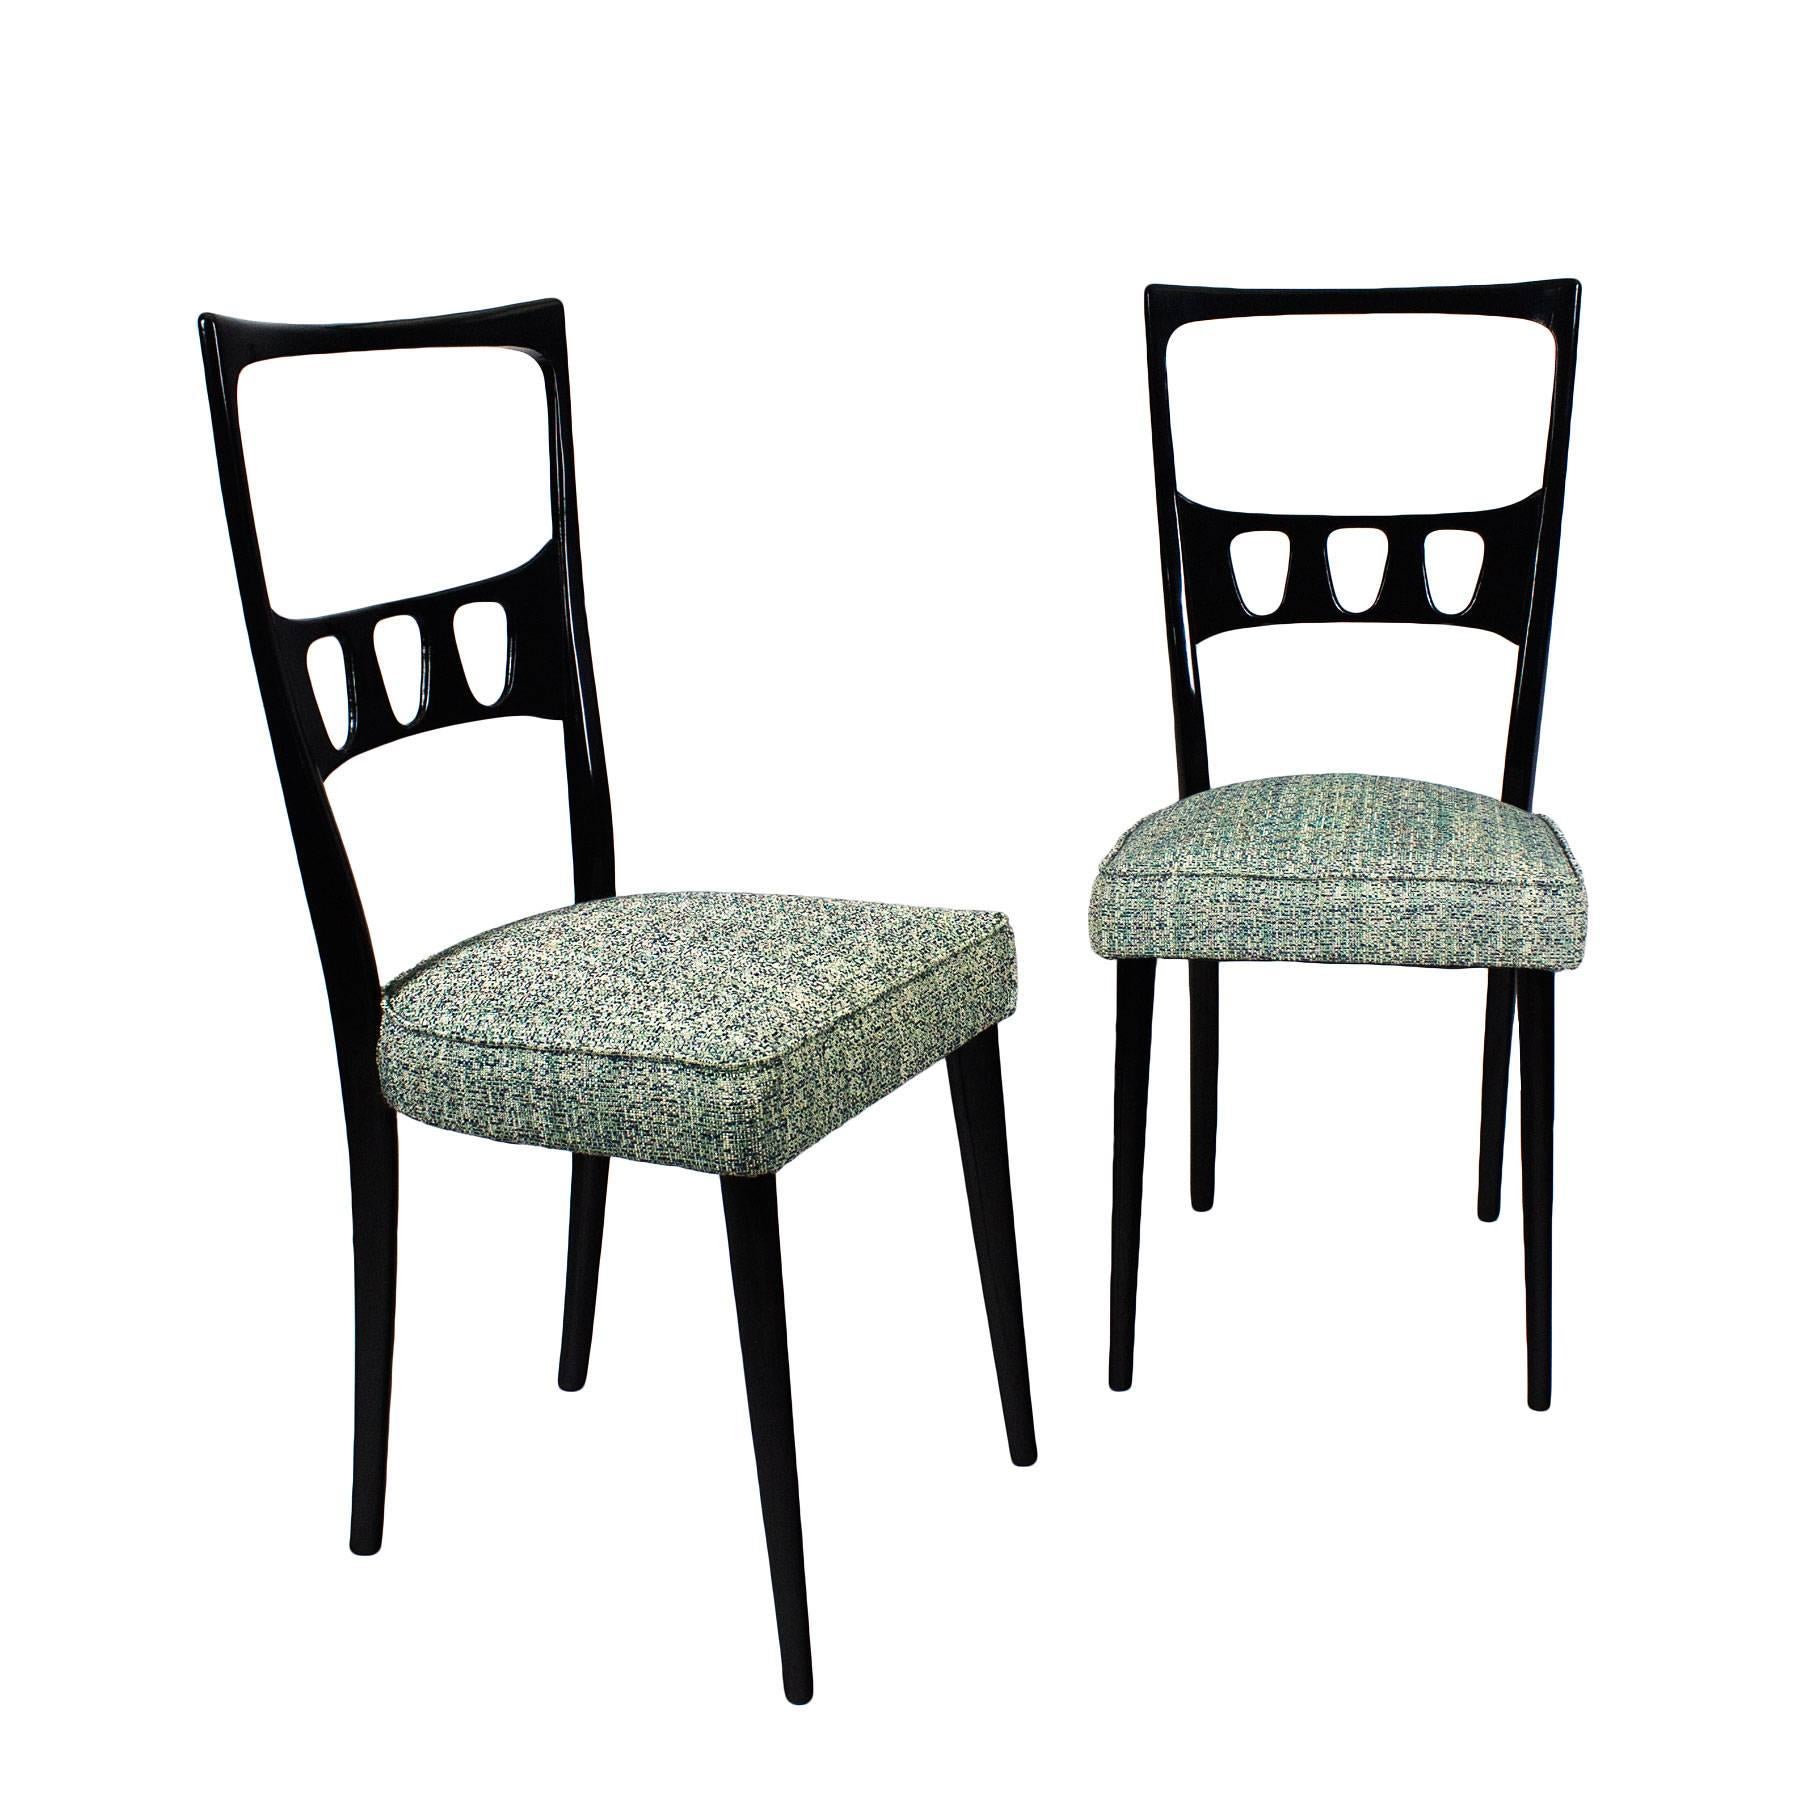 Pair of Mid-Century Modern Chairs, School of Turin, Beech, Fabric - Italy For Sale